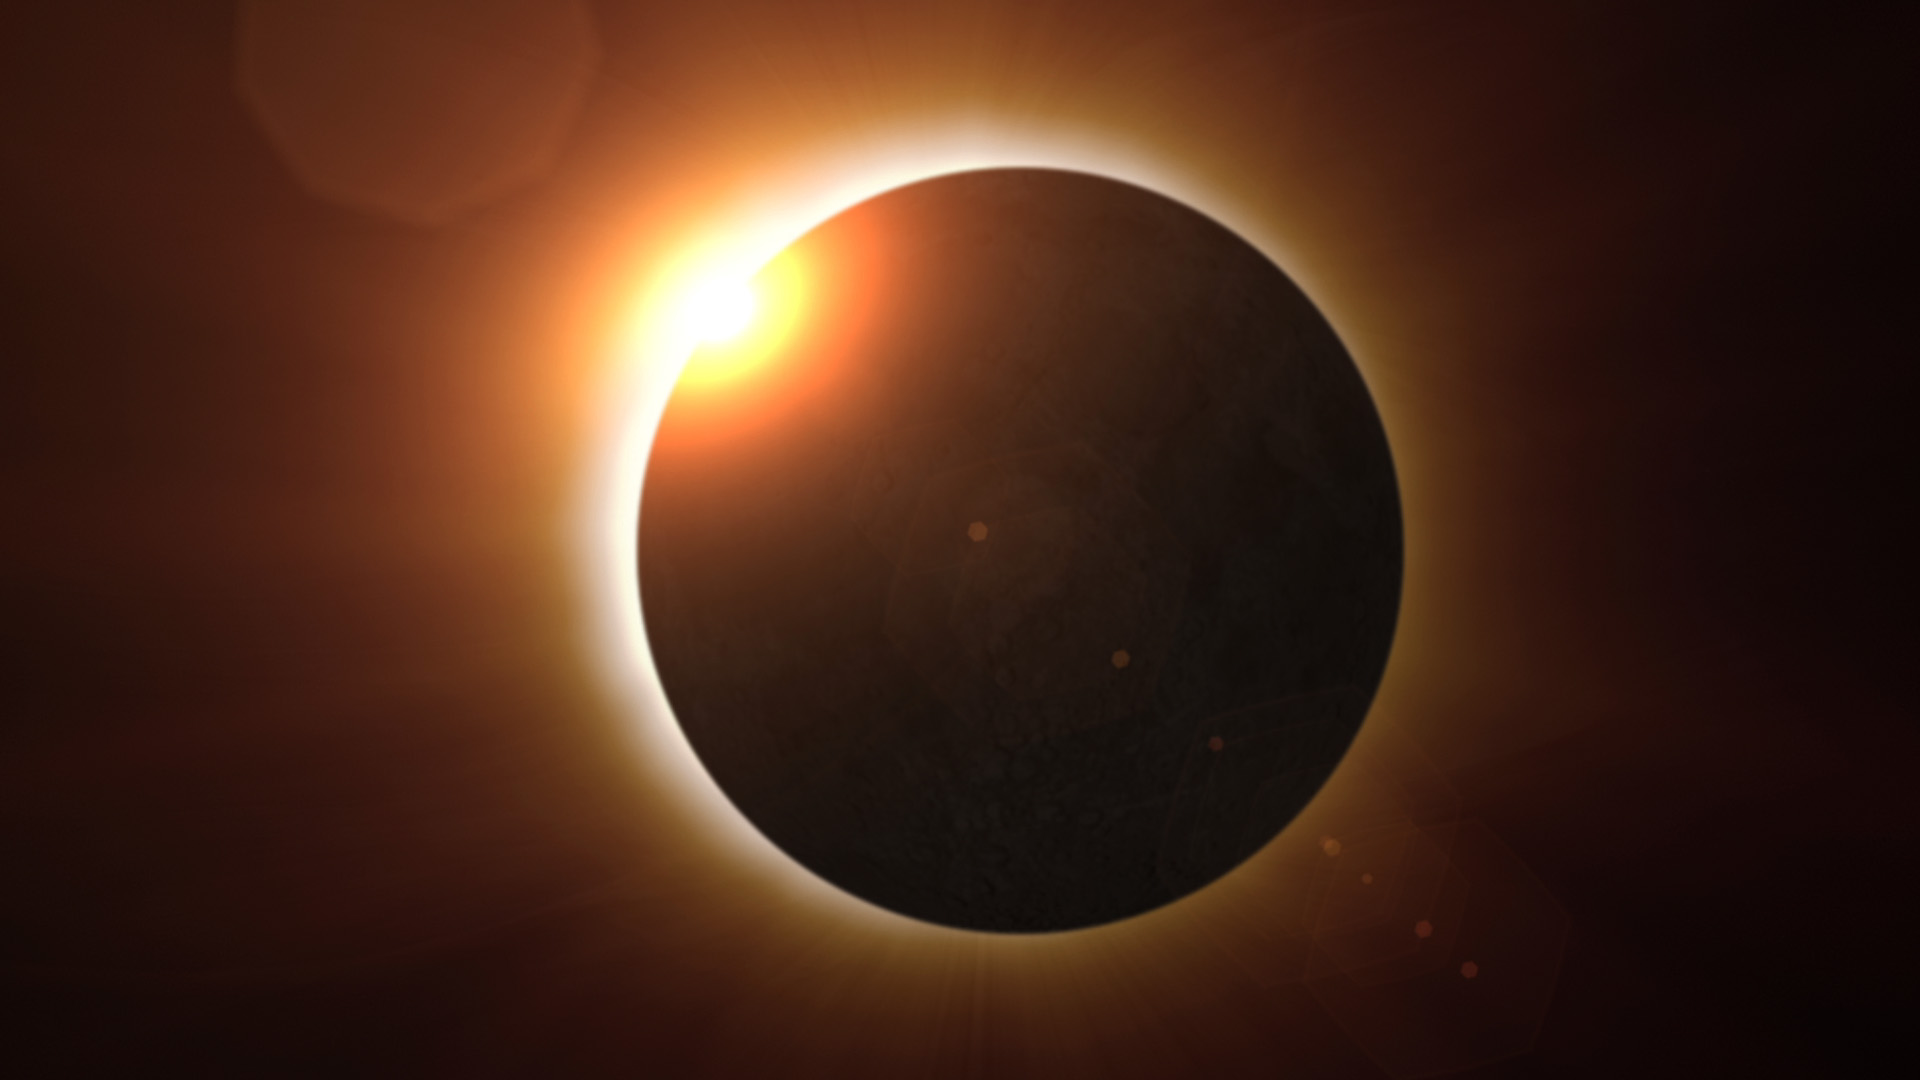   Image of Solar Eclipse from NASA